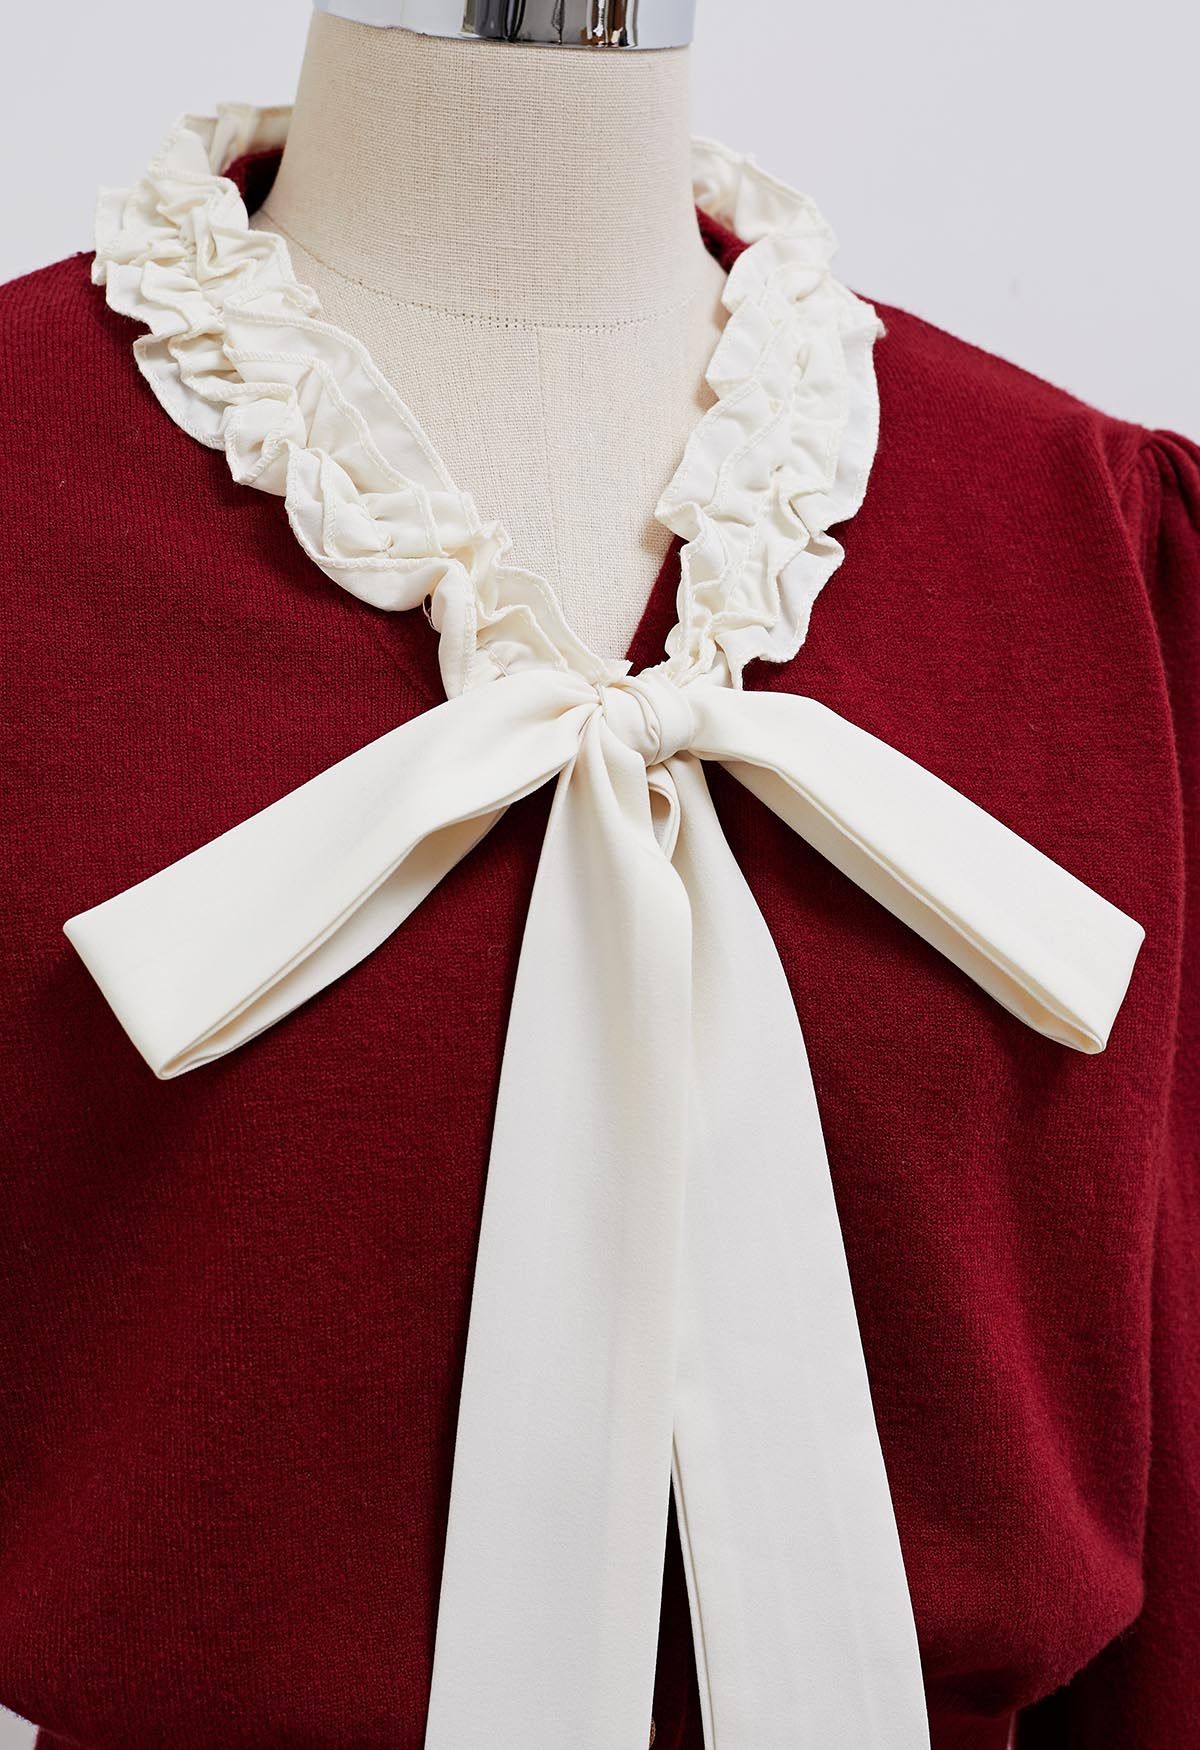 Ruffle Tie-Bow Wool-Blend Buttoned Top in Burgundy